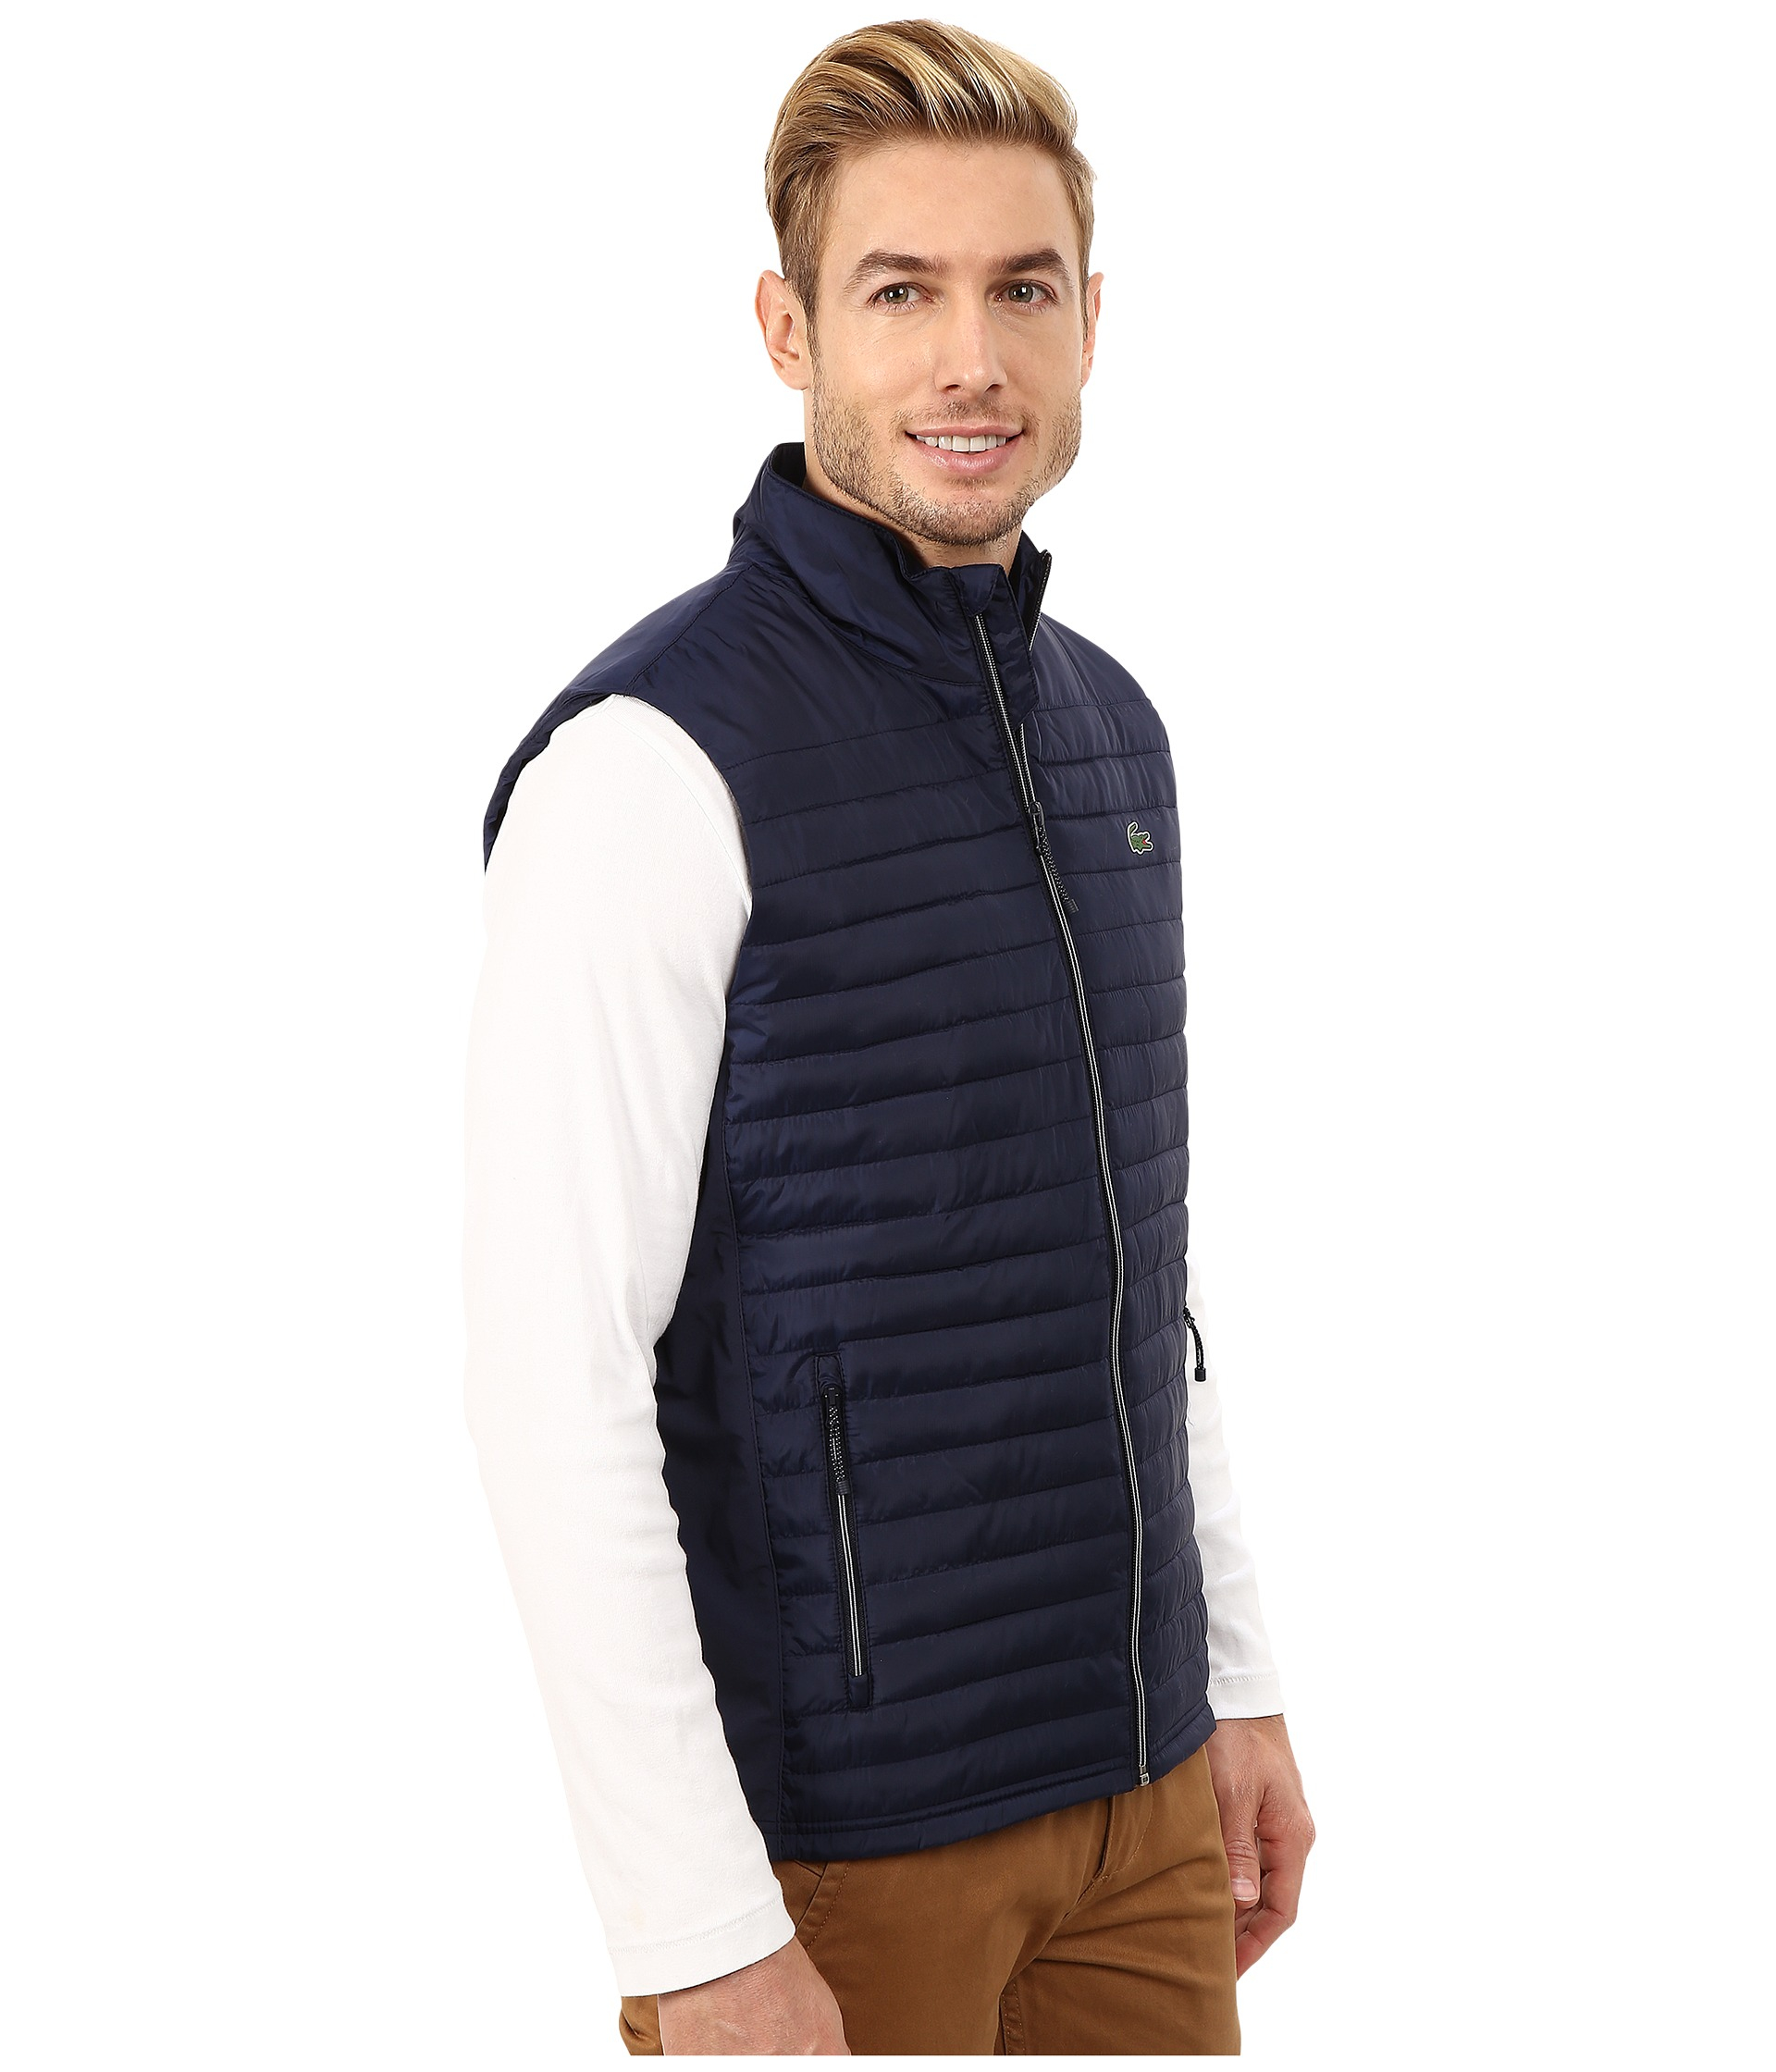 Lacoste Synthetic Sport Golf Ripstop Vest in Navy Blue (Blue) for Men ...